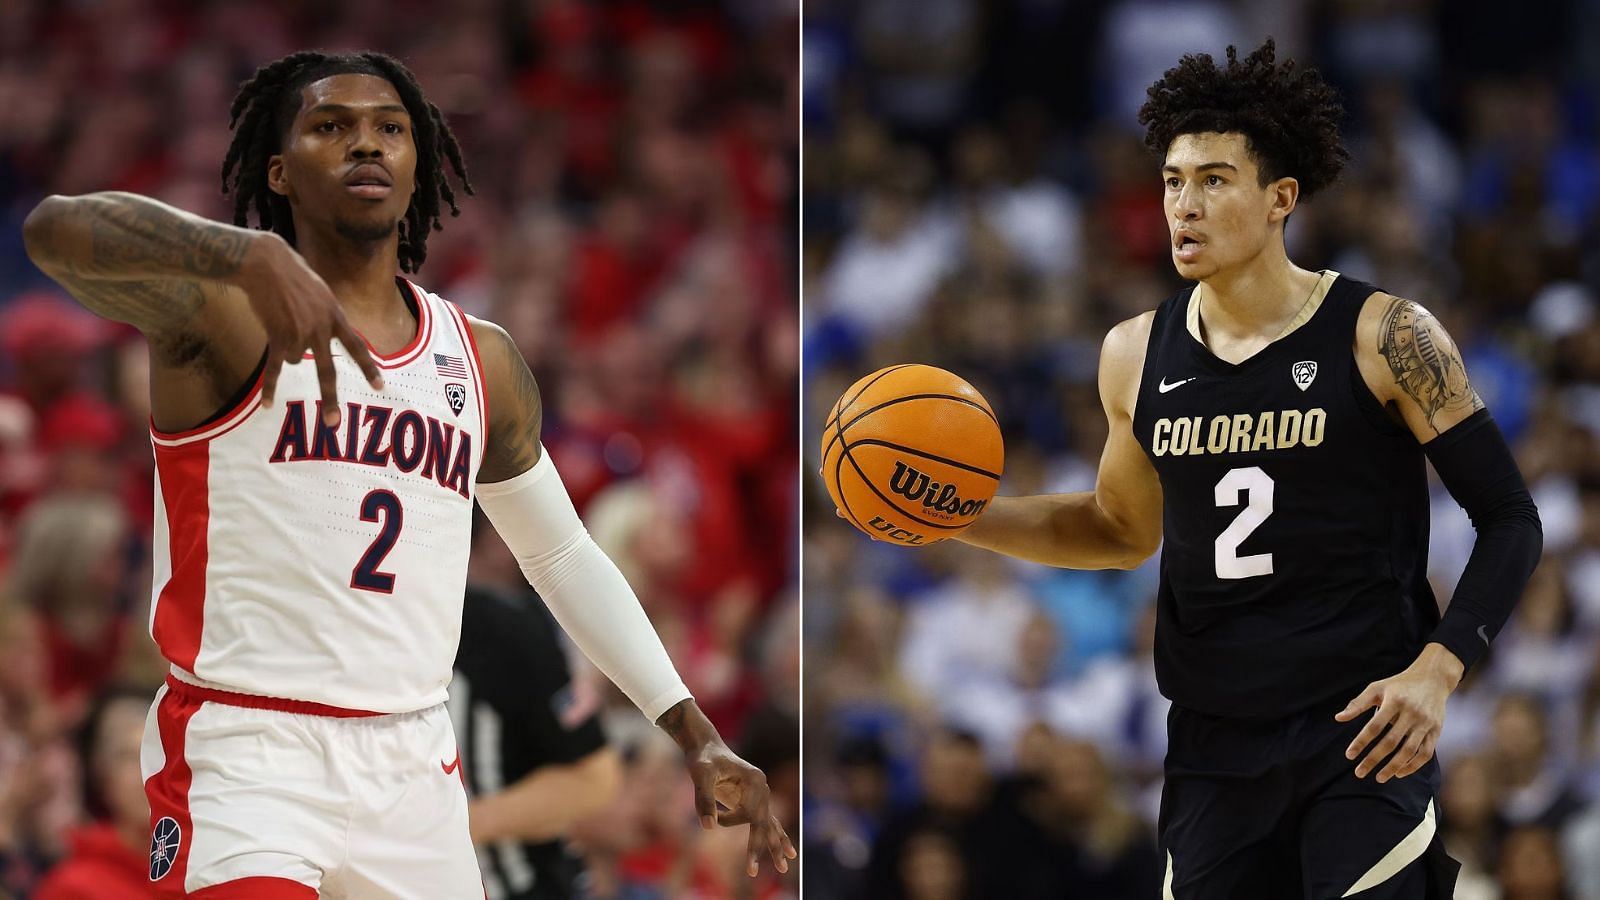 Caleb Love and KJ Simpson are two of the top Pac 12 players heading into the NCAA Tournament.